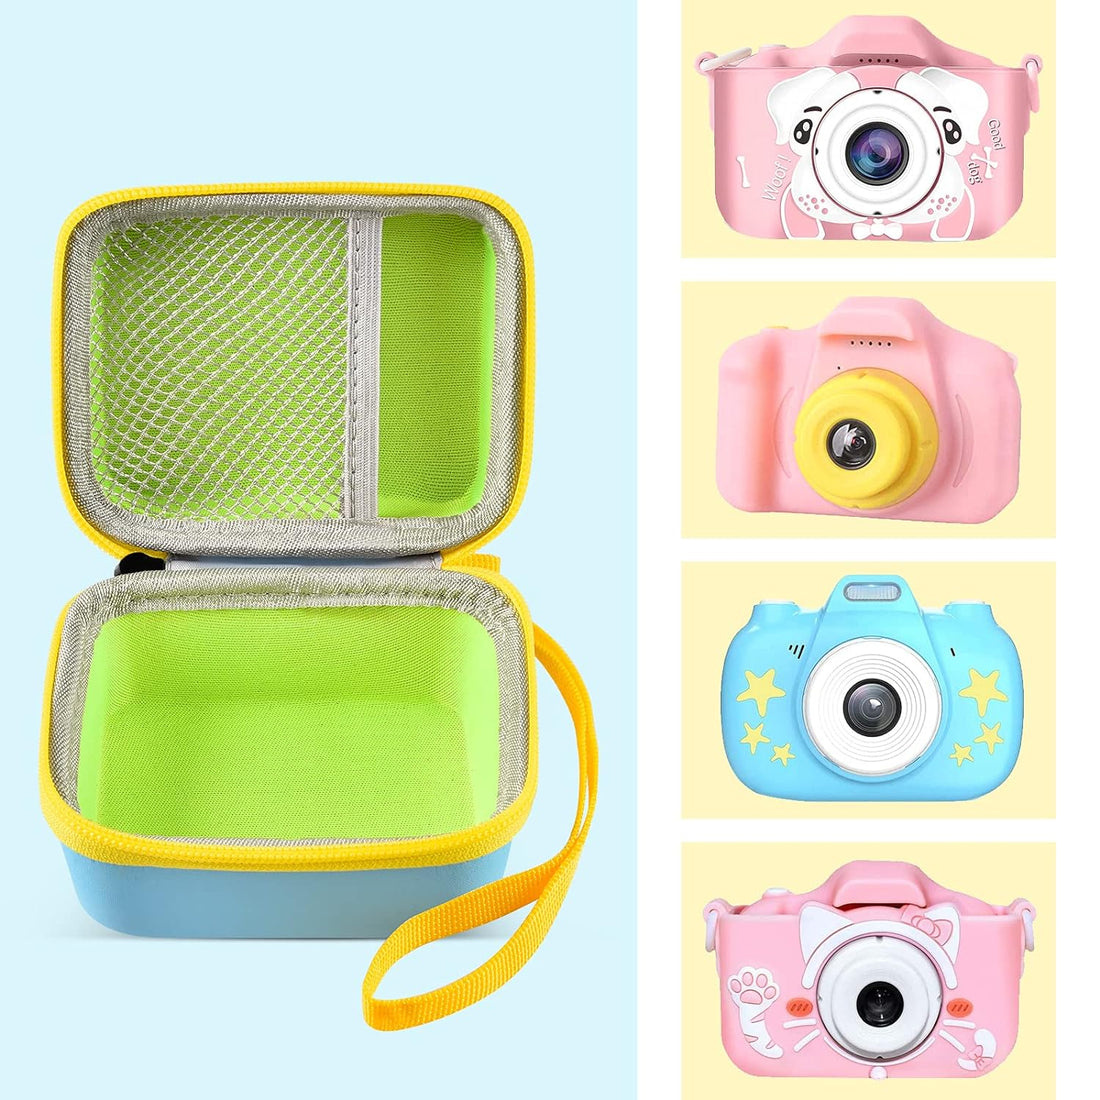 Camera Case Compatible with Seckton /Desuccus /OZMI /GKTZ /LC-dolida /Gofunly /Langwolf /HANGRUI Kids Digital Camera, Kid Camcorder Storage Bag Box Fits for Cable, SD Card and Accessories (Only Bag)